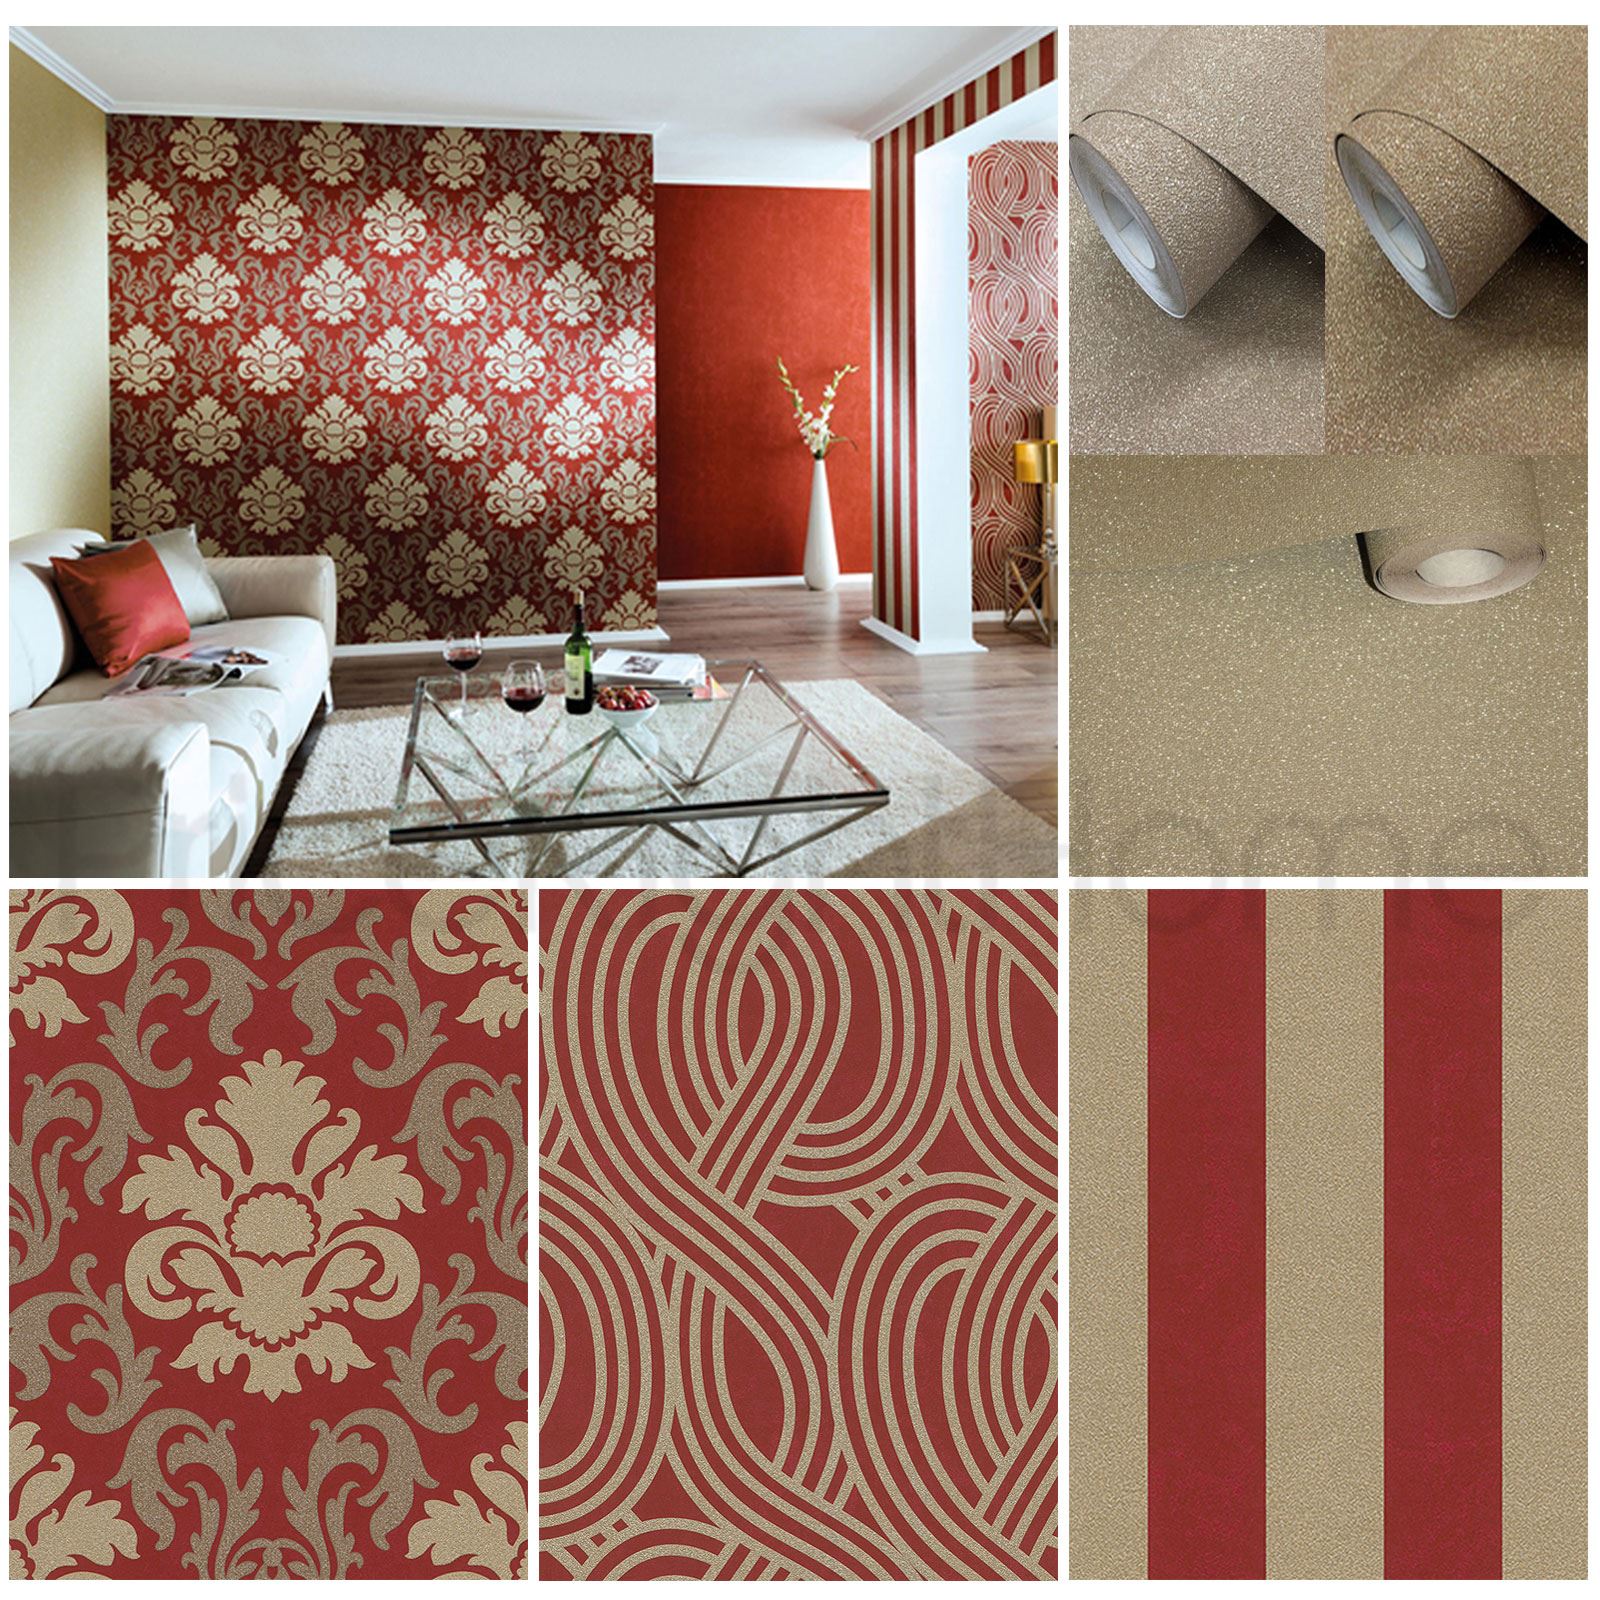 Details About P&s Carat Red & Gold Glitter Wallpaper - Papel Tapiz Fashion For Walls , HD Wallpaper & Backgrounds